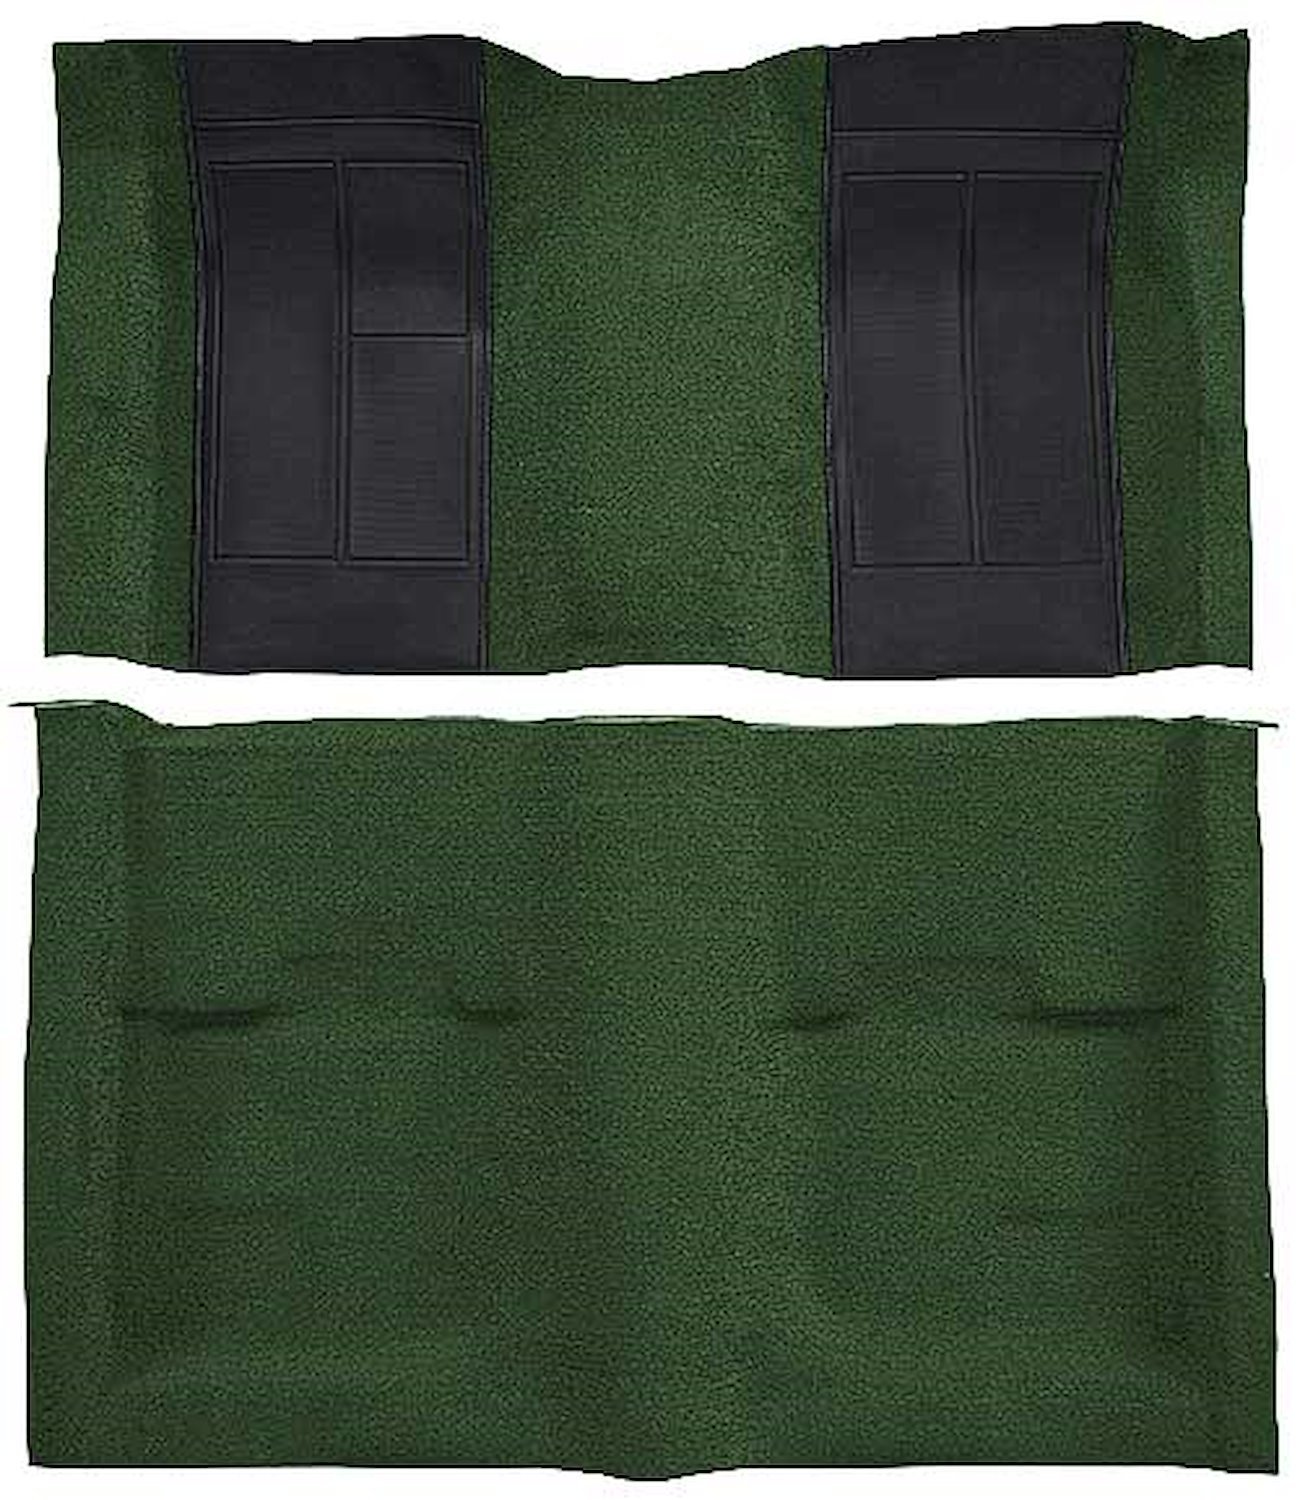 A4107B39 Nylon Loop Floor Carpet With Mass Backing 1970 Mustang Mach 1; Green/Black Inserts